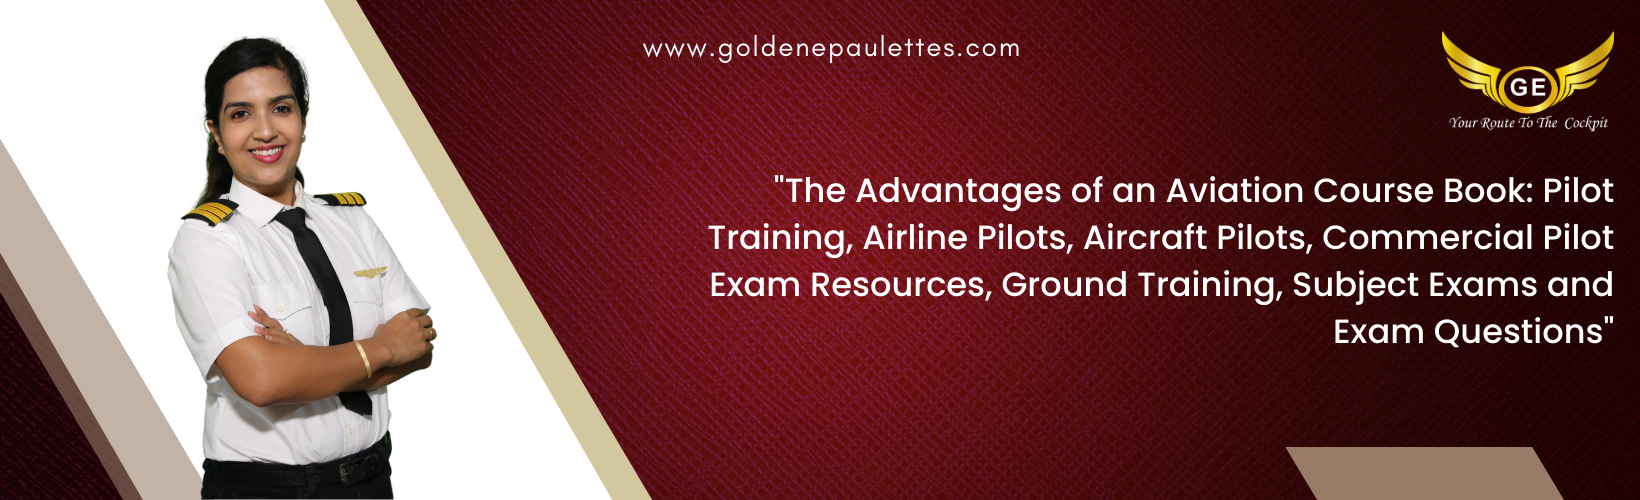 The Benefits of an Aviation Course Book